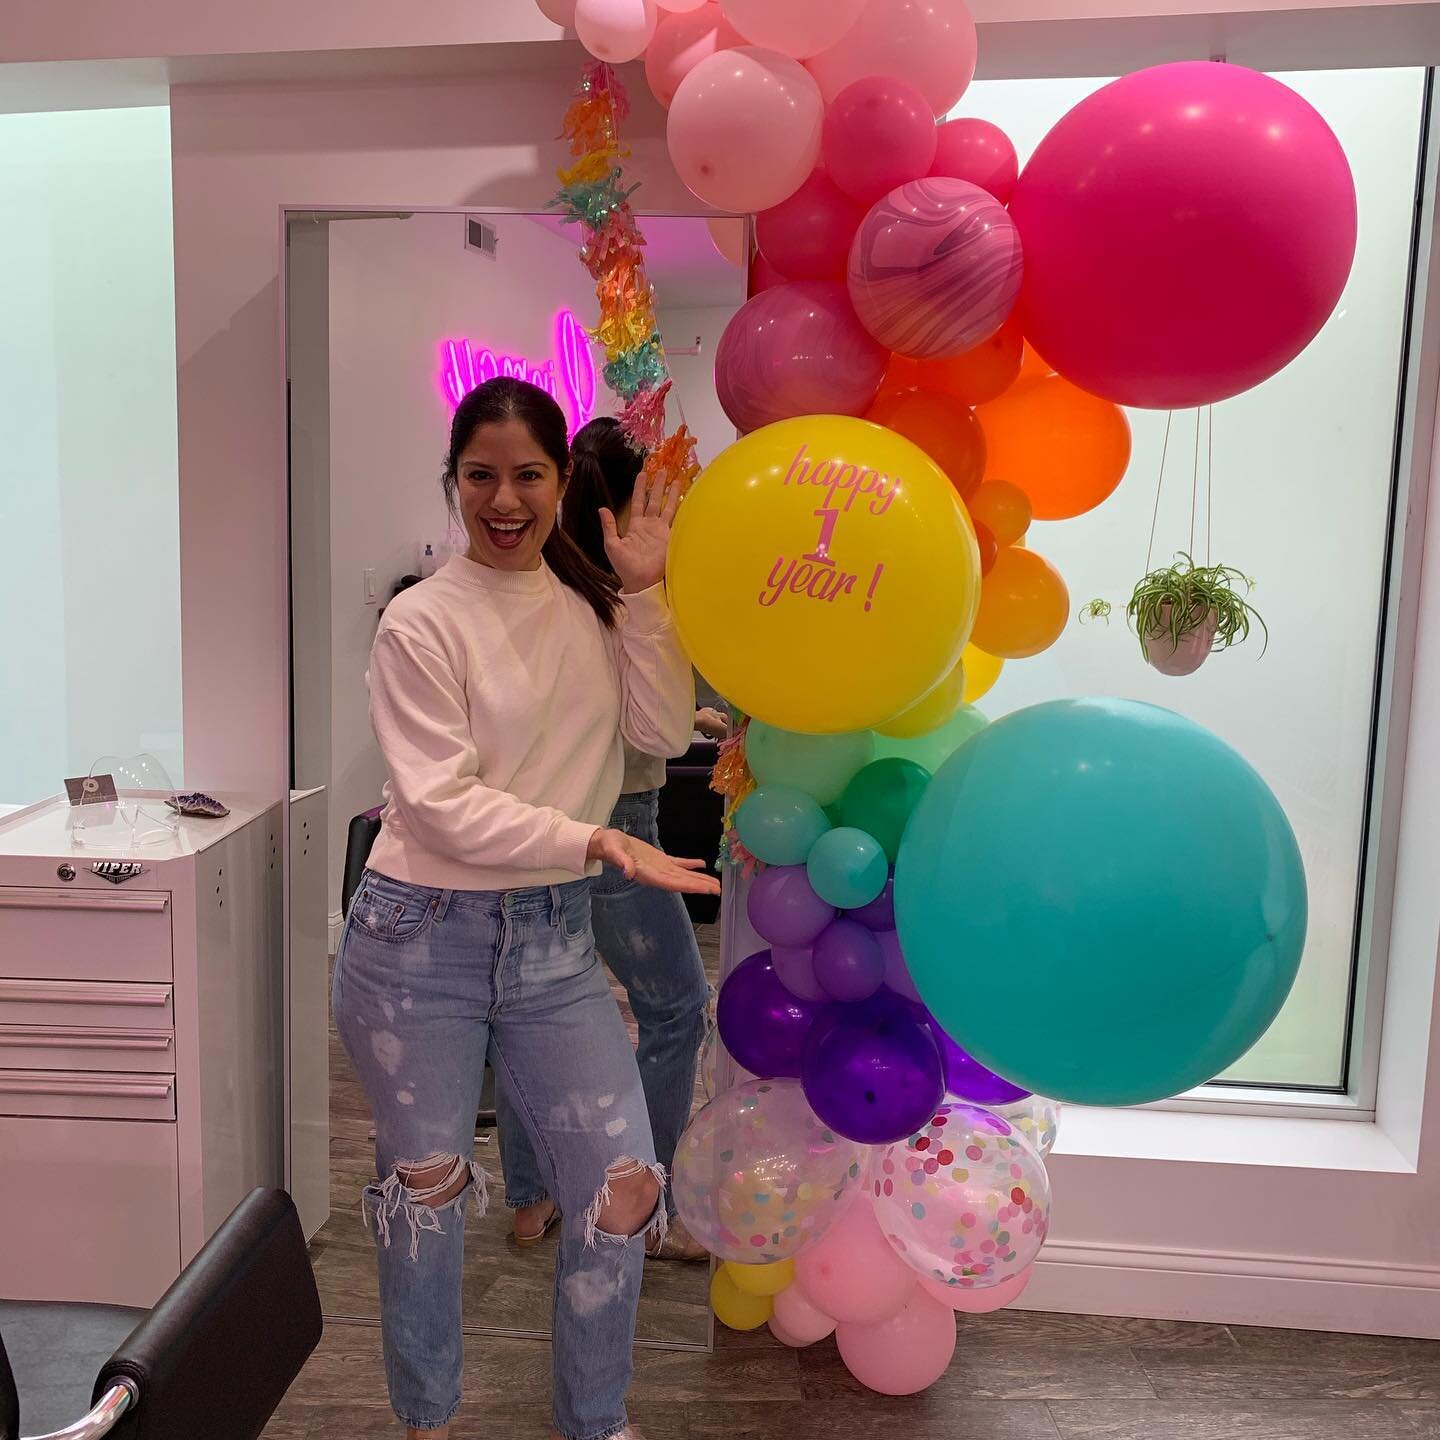 What a year it has been!

Jenny Khan may be an angel, sent to Linmay Studio from heaven itself.

She has added pizazz, professionalism, humor, fun, positivity, and healthy habits to our lives.

Thank you Jenny for being you and making Linmay such a s